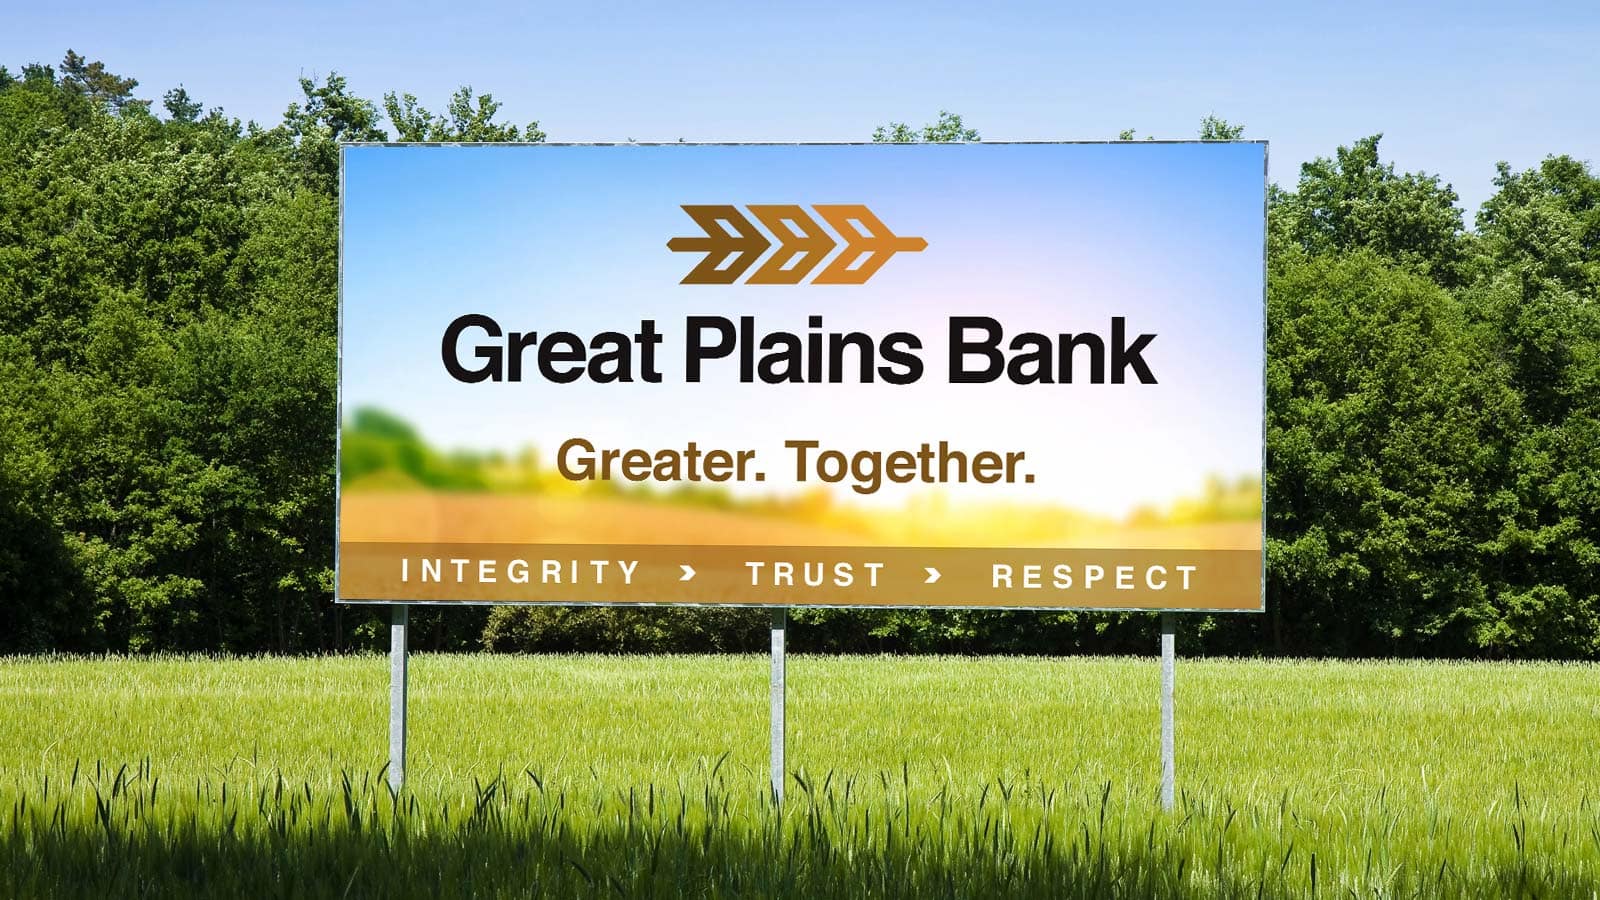 Great Plains Bank - outdoor billboard with new brand design logo